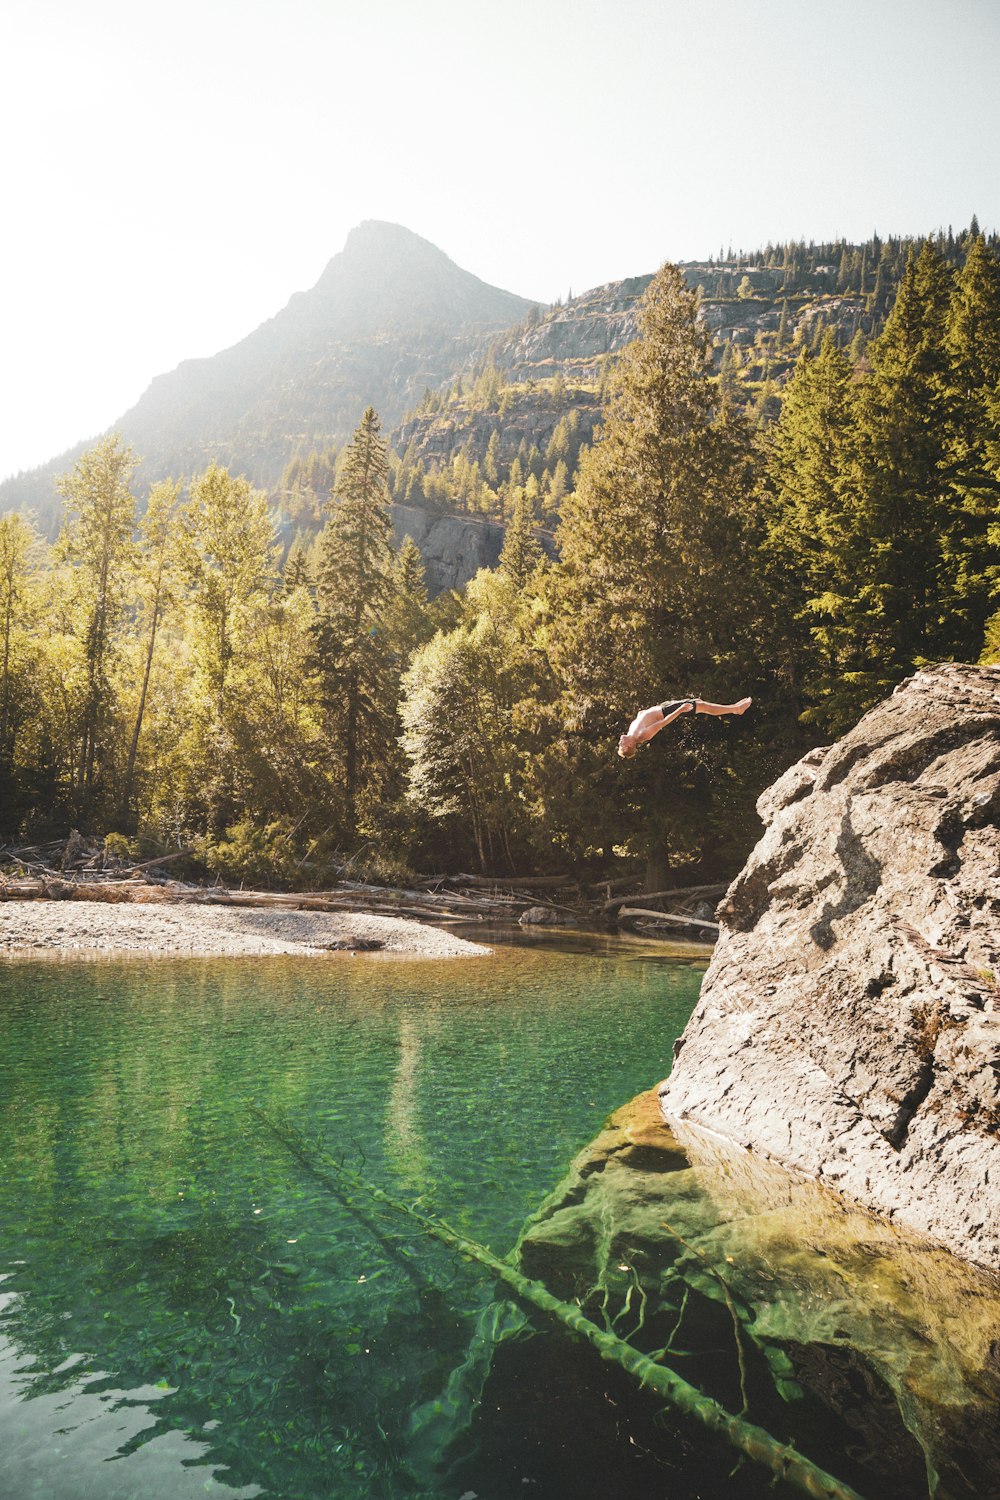 person jumping on water near green trees and mountain during daytime